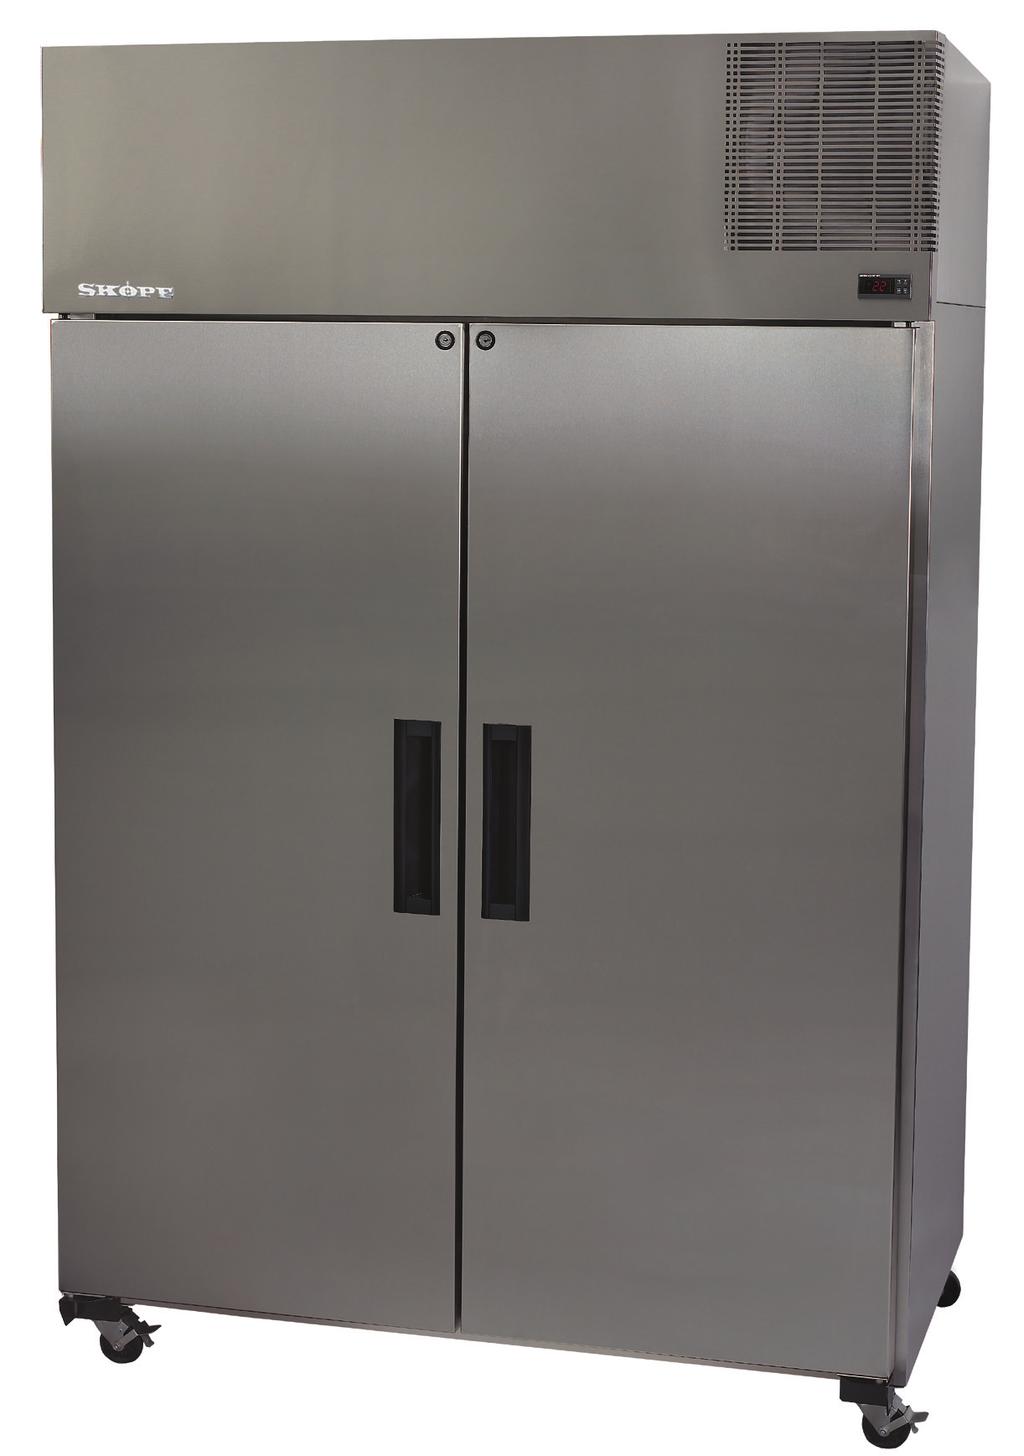 PEGASUS SERIES Premium Range Food Service / Upright Designed to be dependable, these upright chillers and freezers incorporate both 1/1 & 2/1 standard Gastronorm tray and shelf width/depth